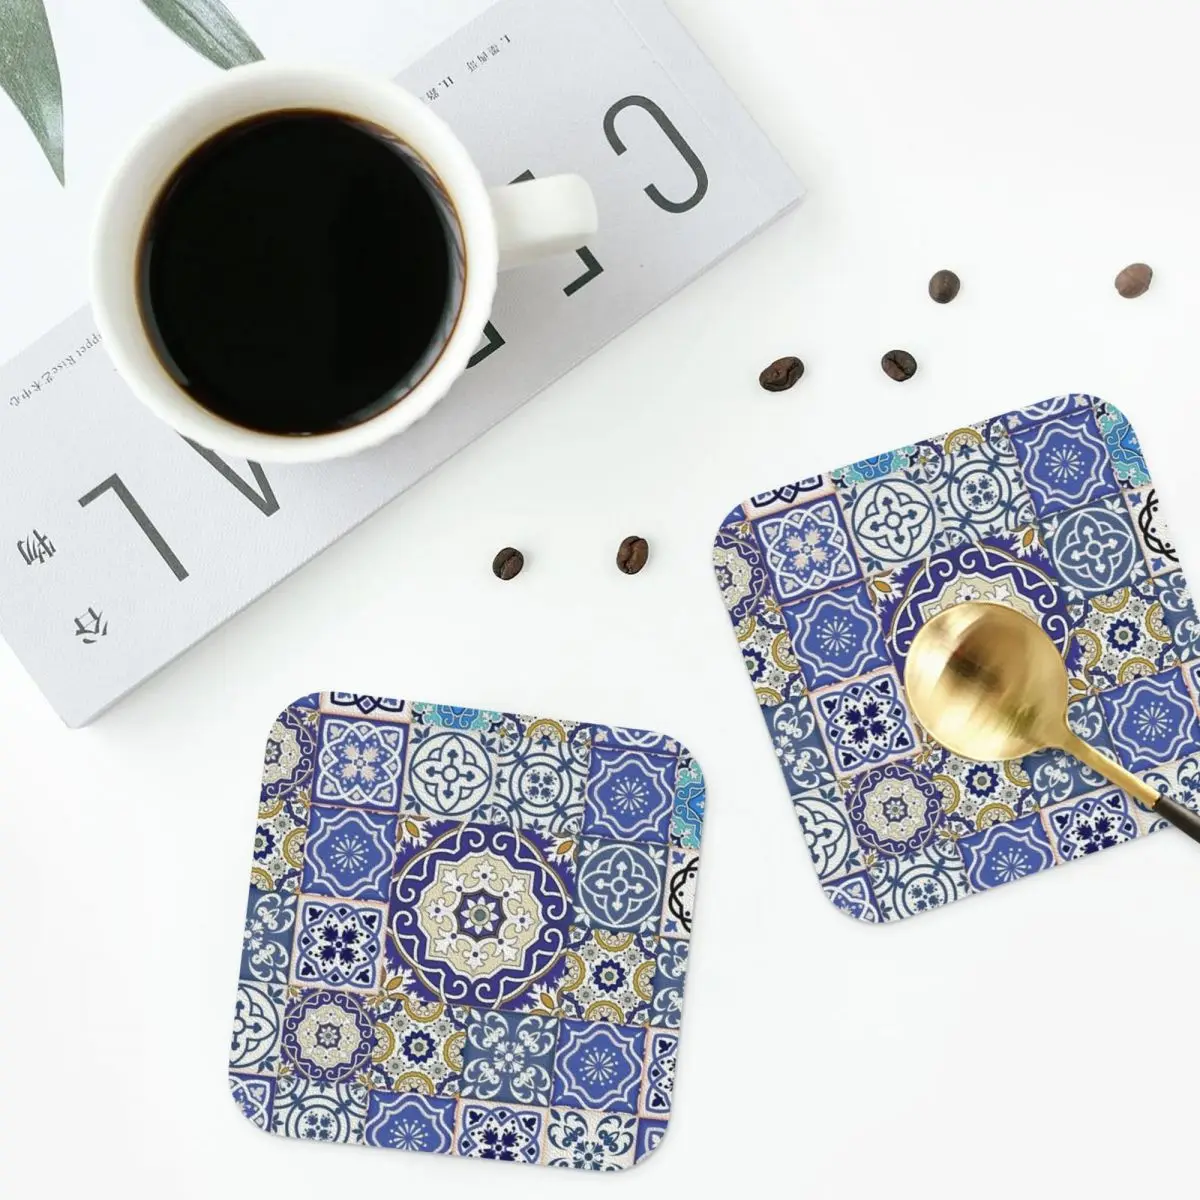 

Blue Moroccan Tile Pattern Coasters Leather Placemats Non-slip Insulation Coffee Mat for Decor Home Kitchen Dining Pads Set of 4